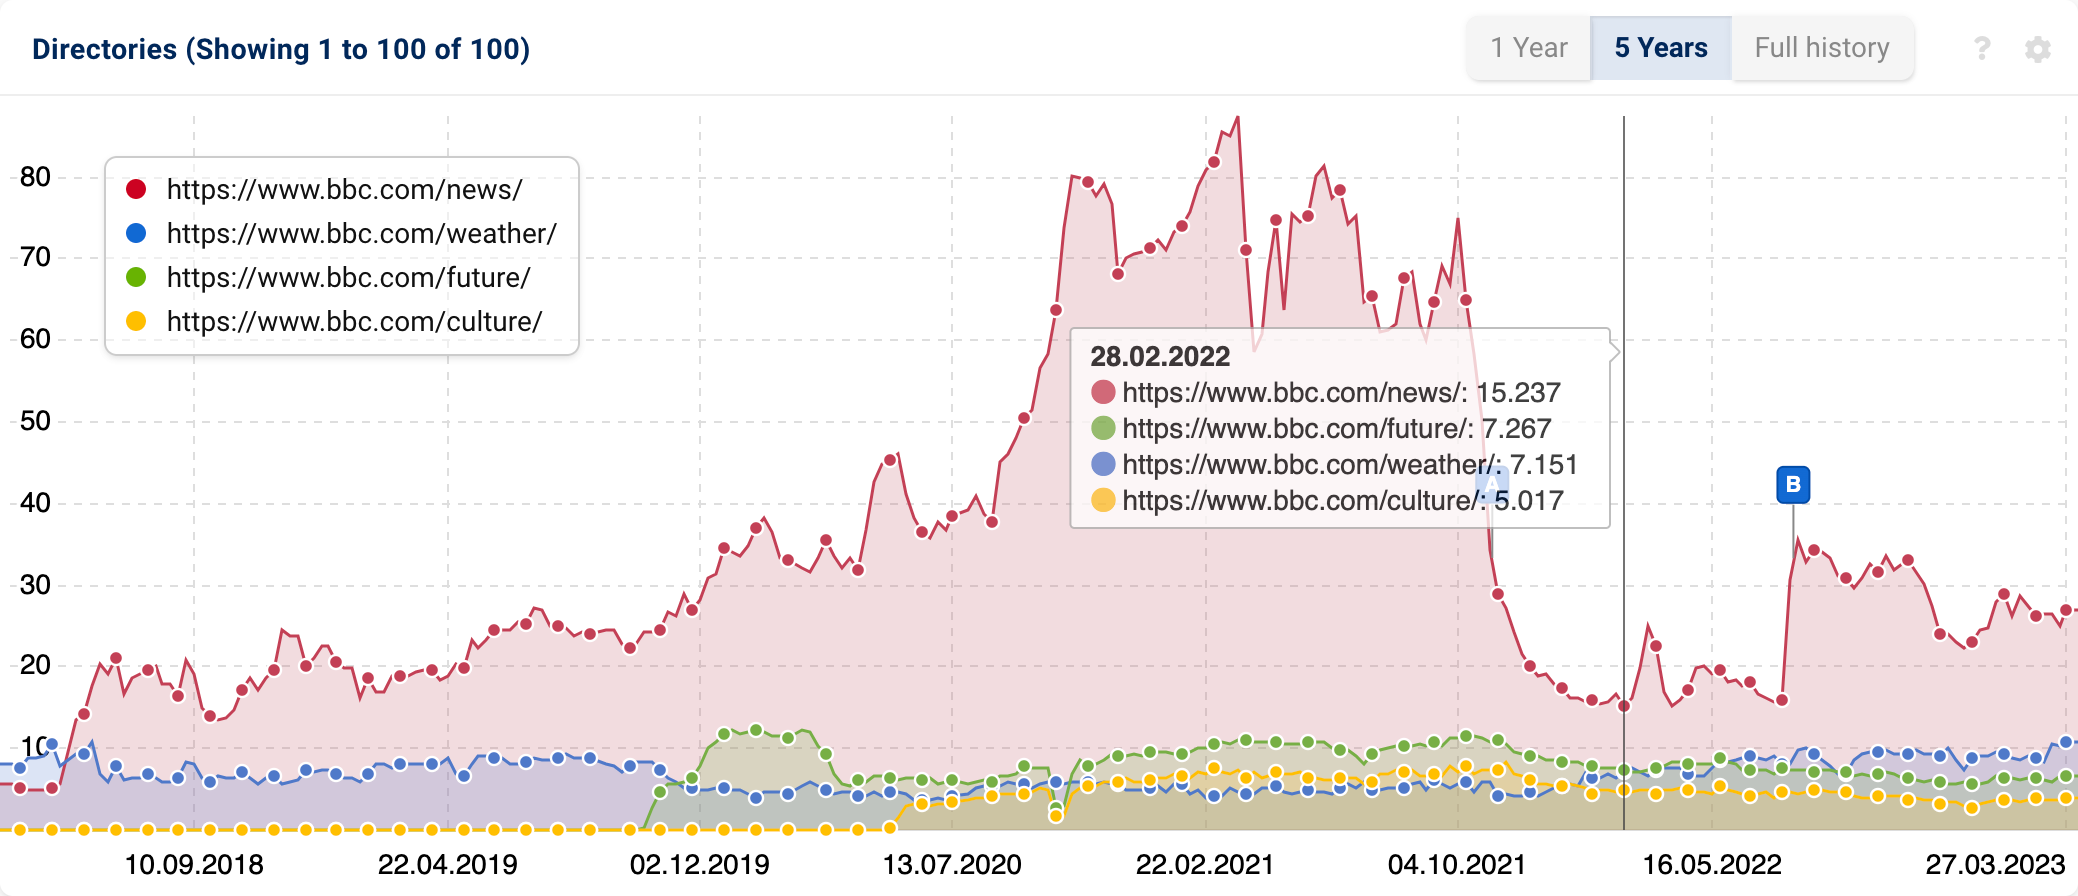 History chart of the four most visible directories of the domain bbc.com in the subitem Directories in SISTRIX. The mouse is over the date 28.02.2022 and the visibility values for the directories displayed in the history are listed there.